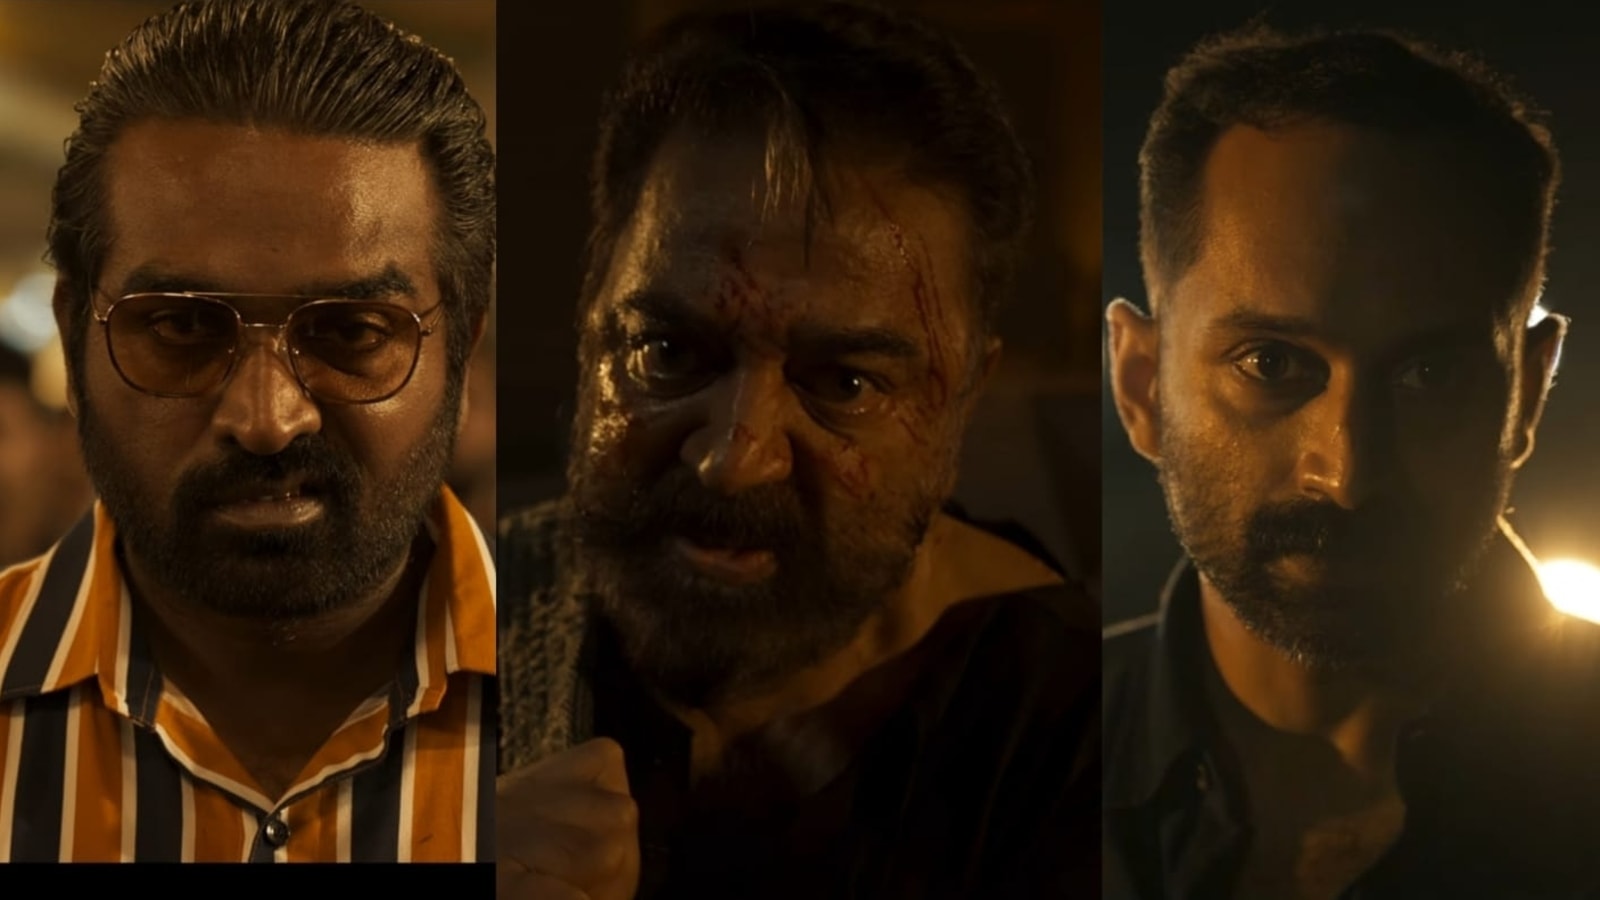 Kamal Haasan on working with Vijay Sethupathi and Fahadh Faasil in Vikram: ‘I always think of talent as competition’